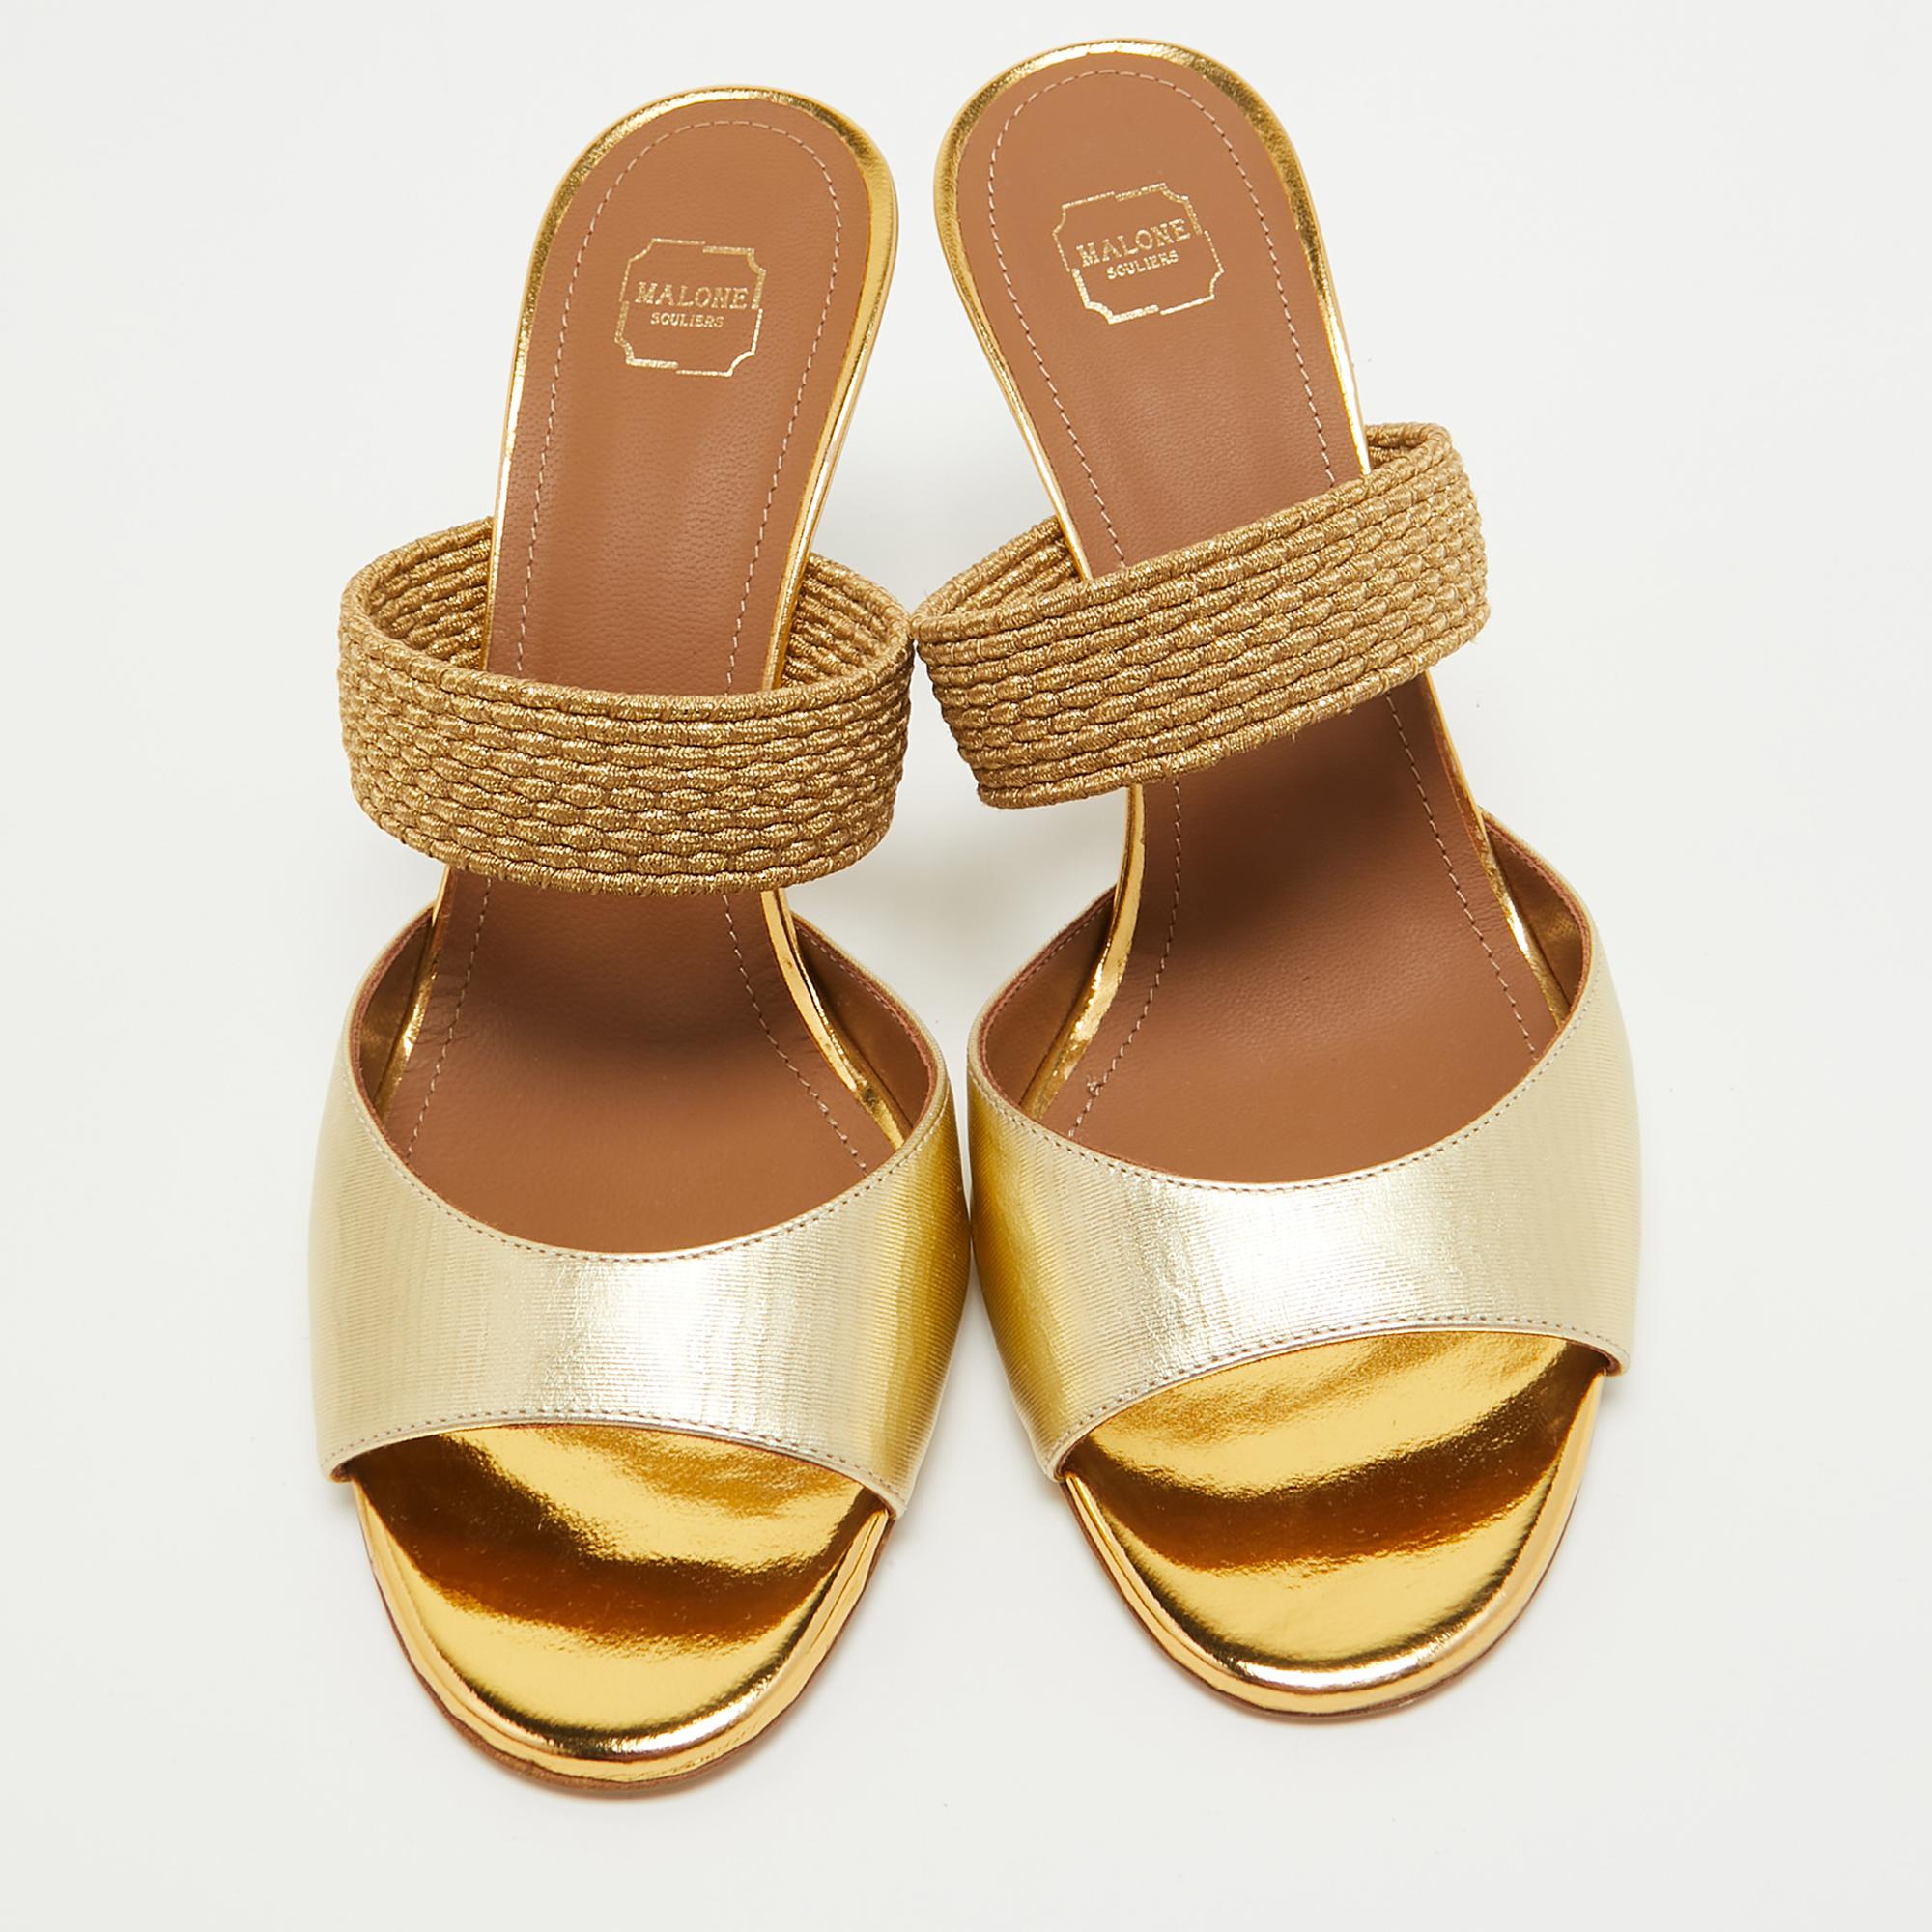 Crafted in a classy hue, we love these Malone Souliers mules. Designed to make a statement, they have a sleek silhouette and a nice fit. Wear yours under maxi skirts for a peek of glamor, or let them shine with cropped hemlines.

